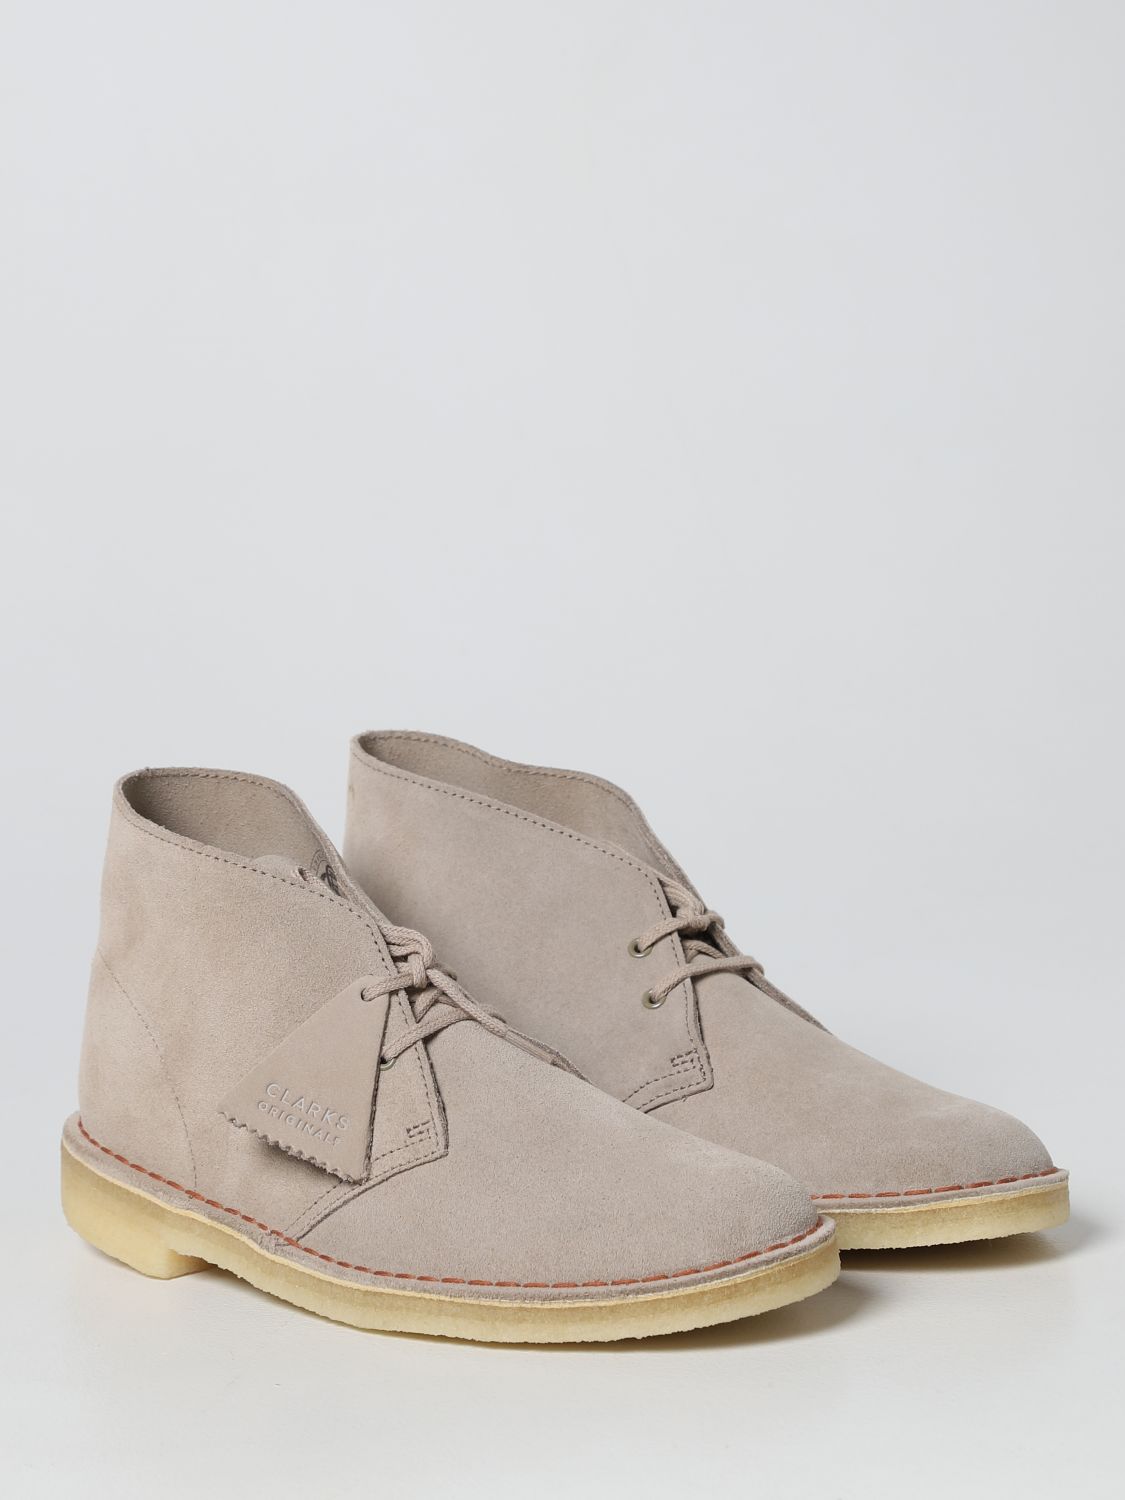 Desert Boots Homme couleur GIGLIO.COM Homme Chaussures Bottes Bottines 